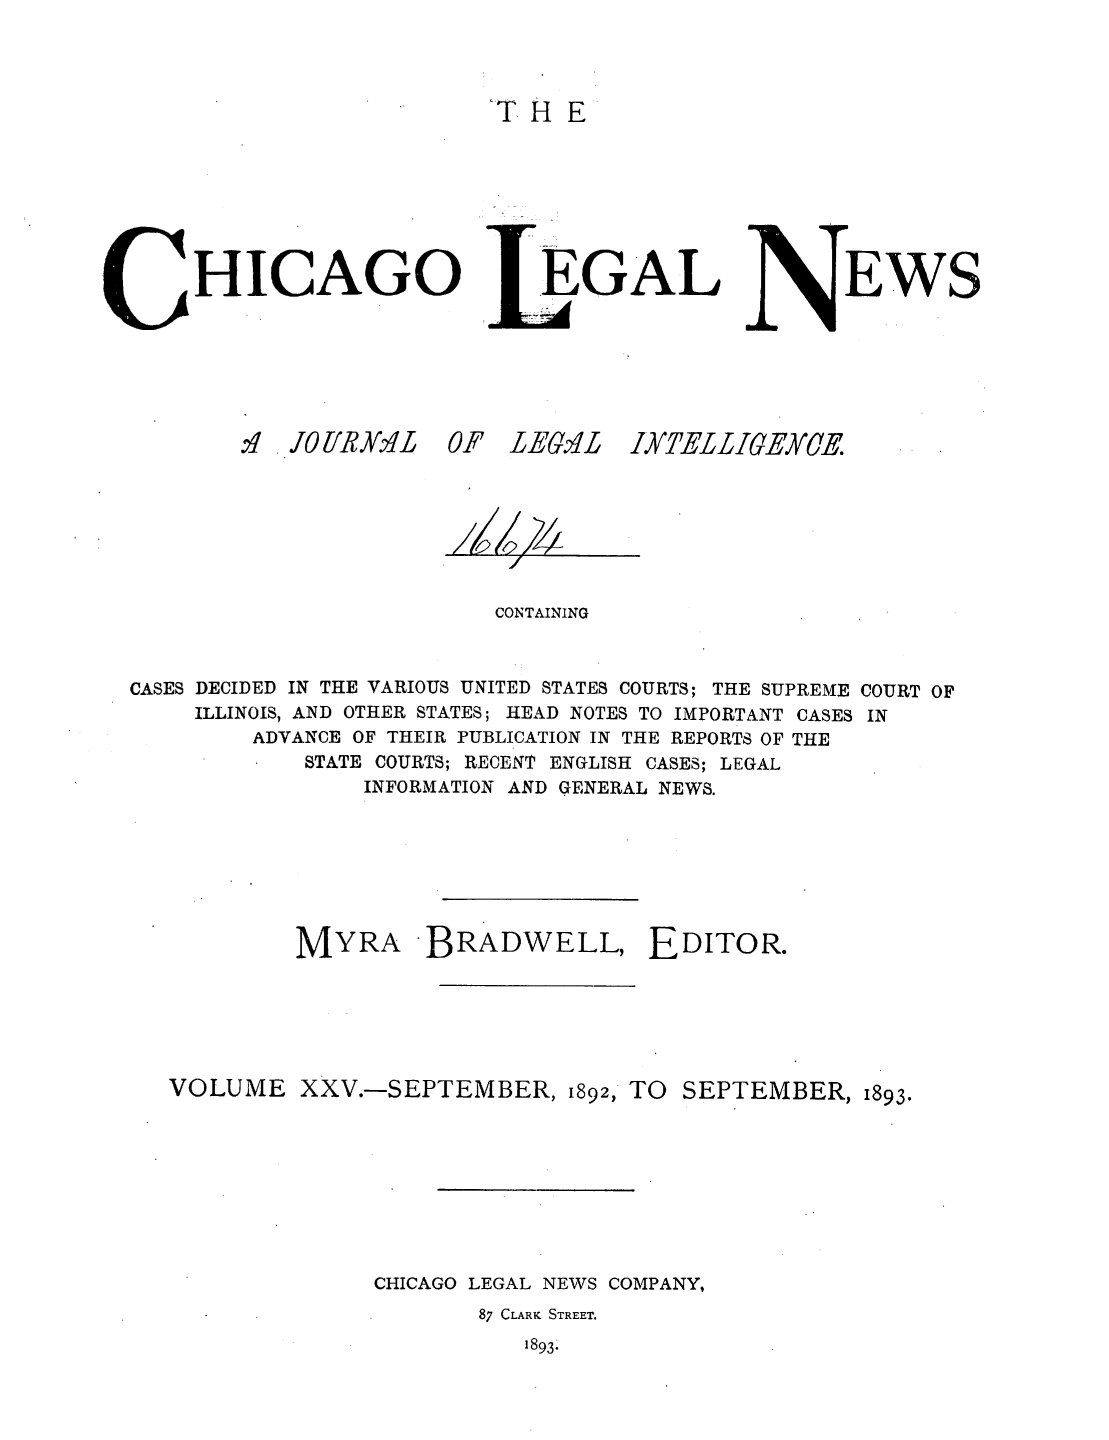 handle is hein.journals/chiclene25 and id is 1 raw text is: TH EHICAGO.,I . JO UR 0  0EGALF LE1.2LEWSCONTAININGCASES DECIDED IN THE VARIOUS UNITED STATES COURTS; THE SUPREME COURT OFILLINOIS, AND OTHER STATES; HEAD NOTES TO IMPORTANT CASES INADVANCE OF THEIR PUBLICATION IN THE REPORTS OF THESTATE COURTS; RECENT ENGLISH CASES; LEGALINFORMATION AND GENERAL NEWS.MYRA BRADWELL, EDITOR.VOLUME XXV.-SEPTEMBER, 1892, TO SEPTEMBER, 1893.CHICAGO LEGAL NEWS COMPANY,87 CLARK STREET.1893.LATELLIGEXCE.s-Z, dl 1